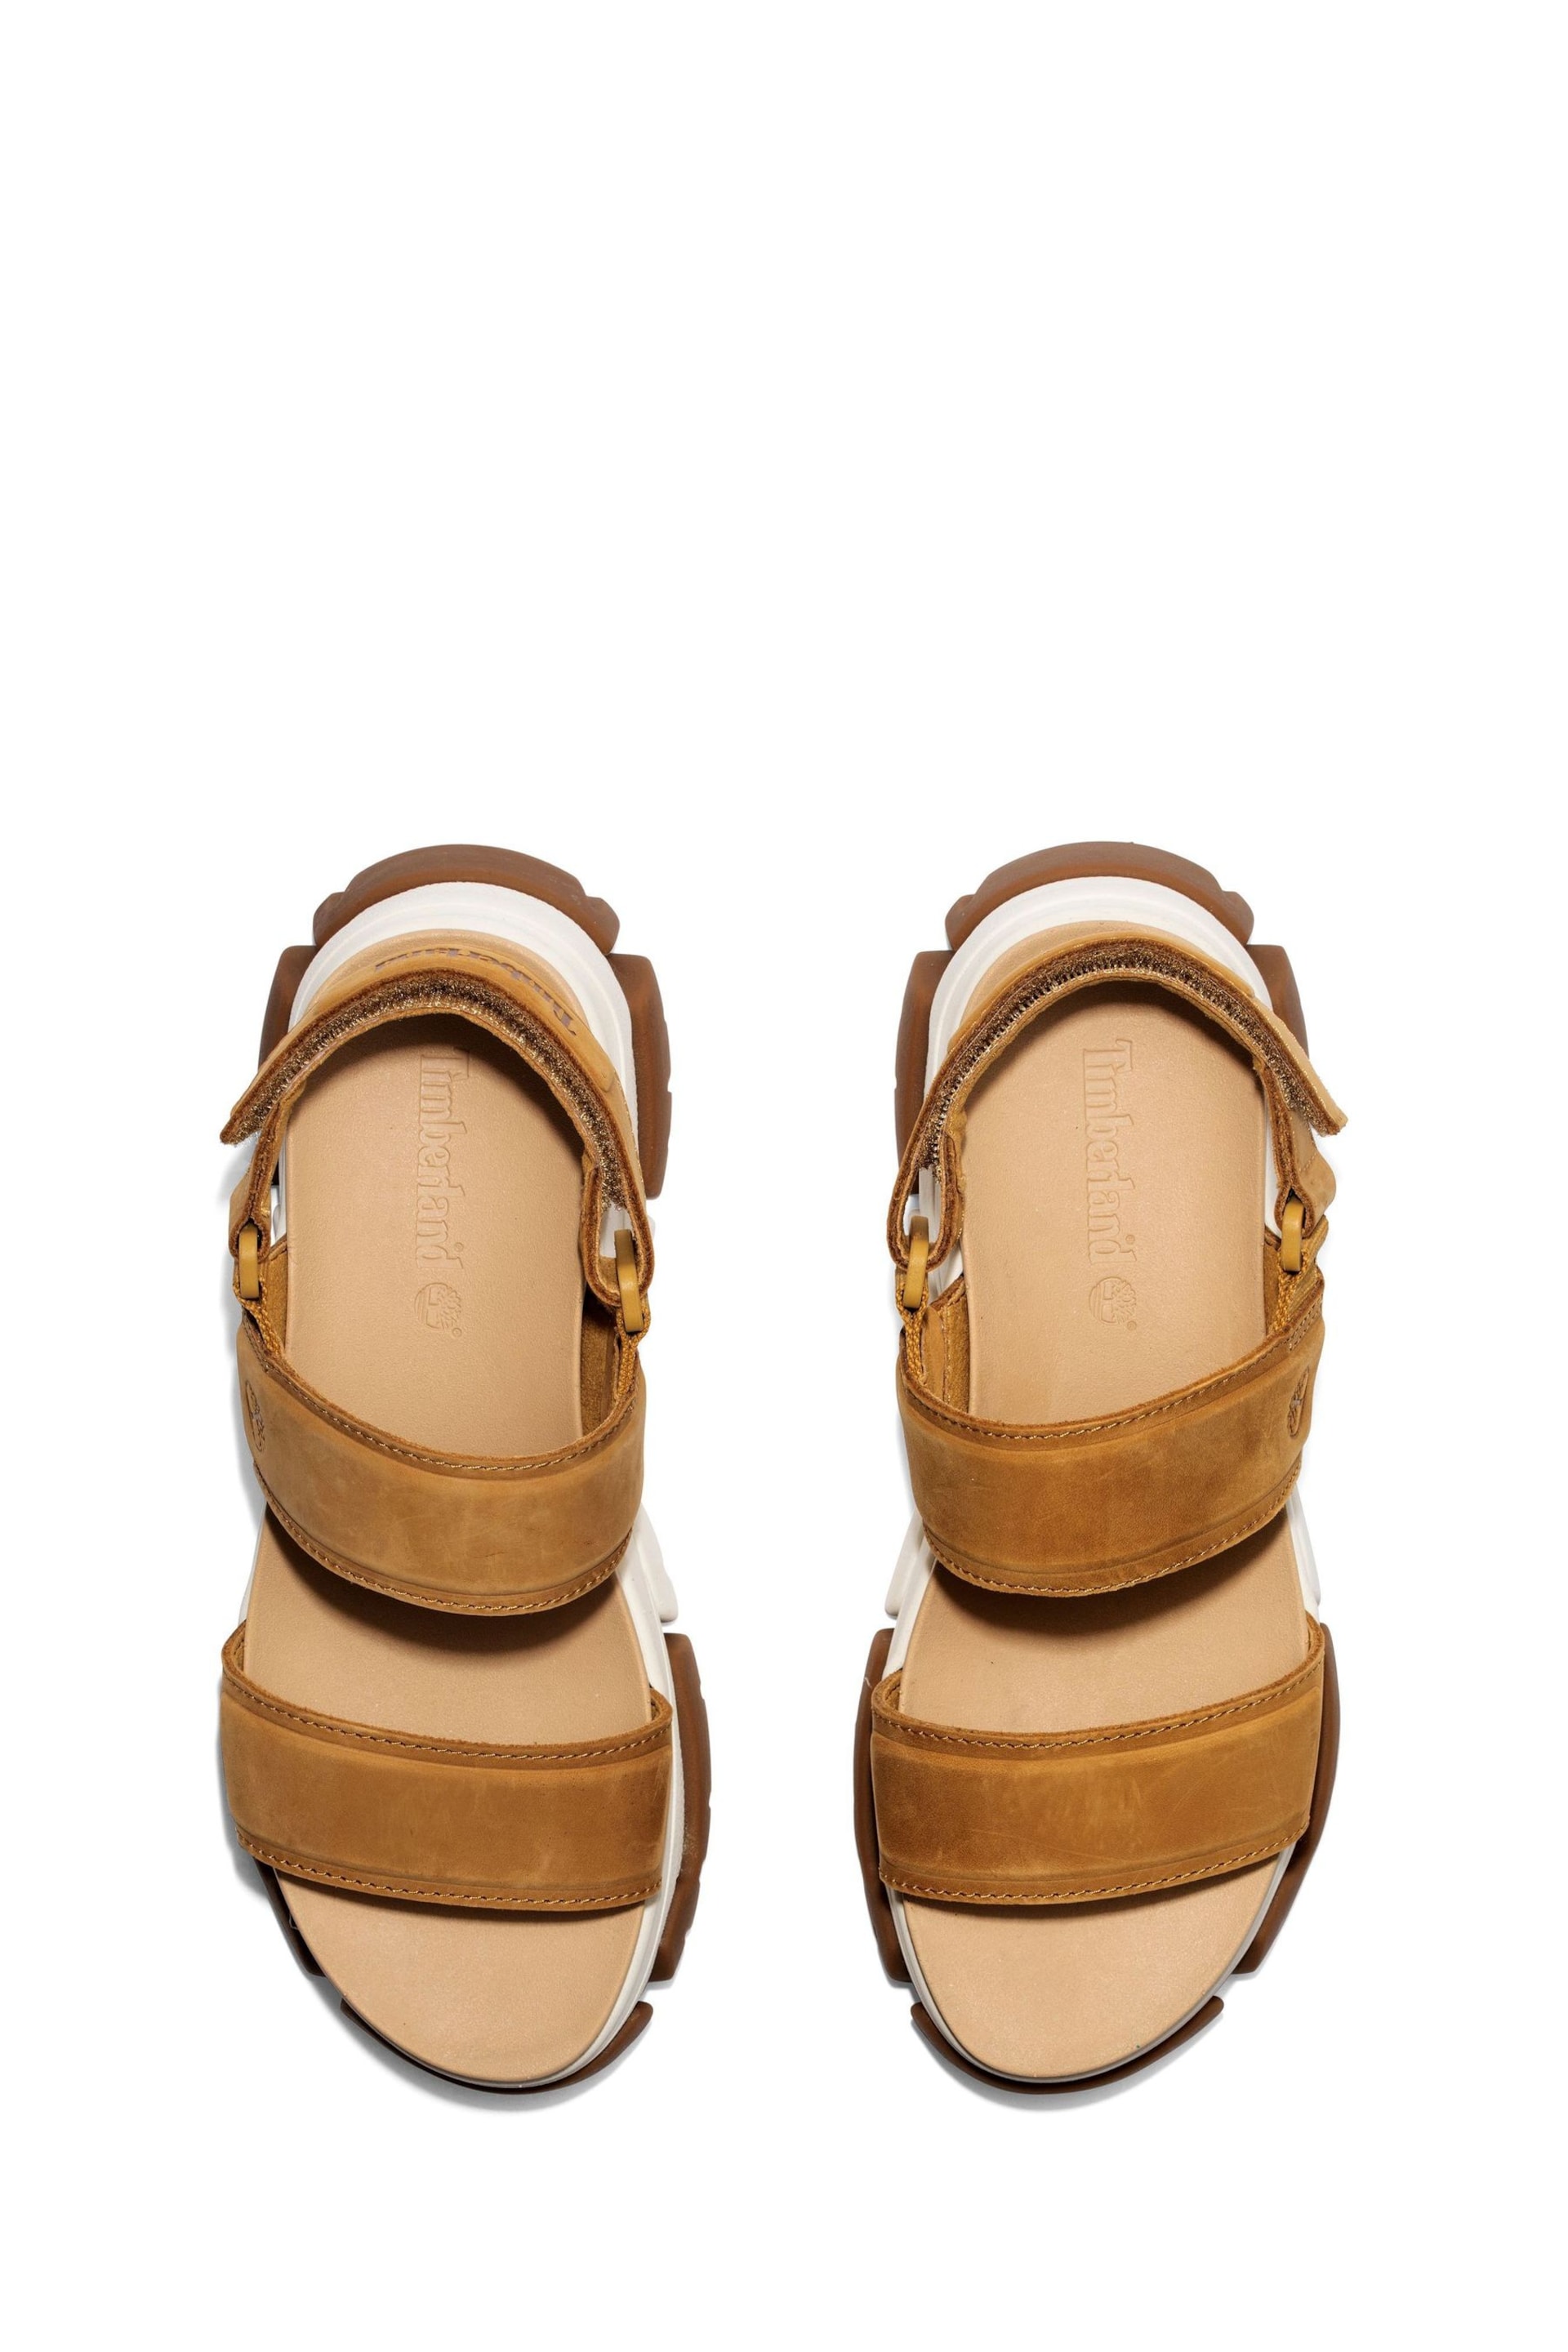 Timberland Yellow Adley Way Sandals - Image 6 of 9